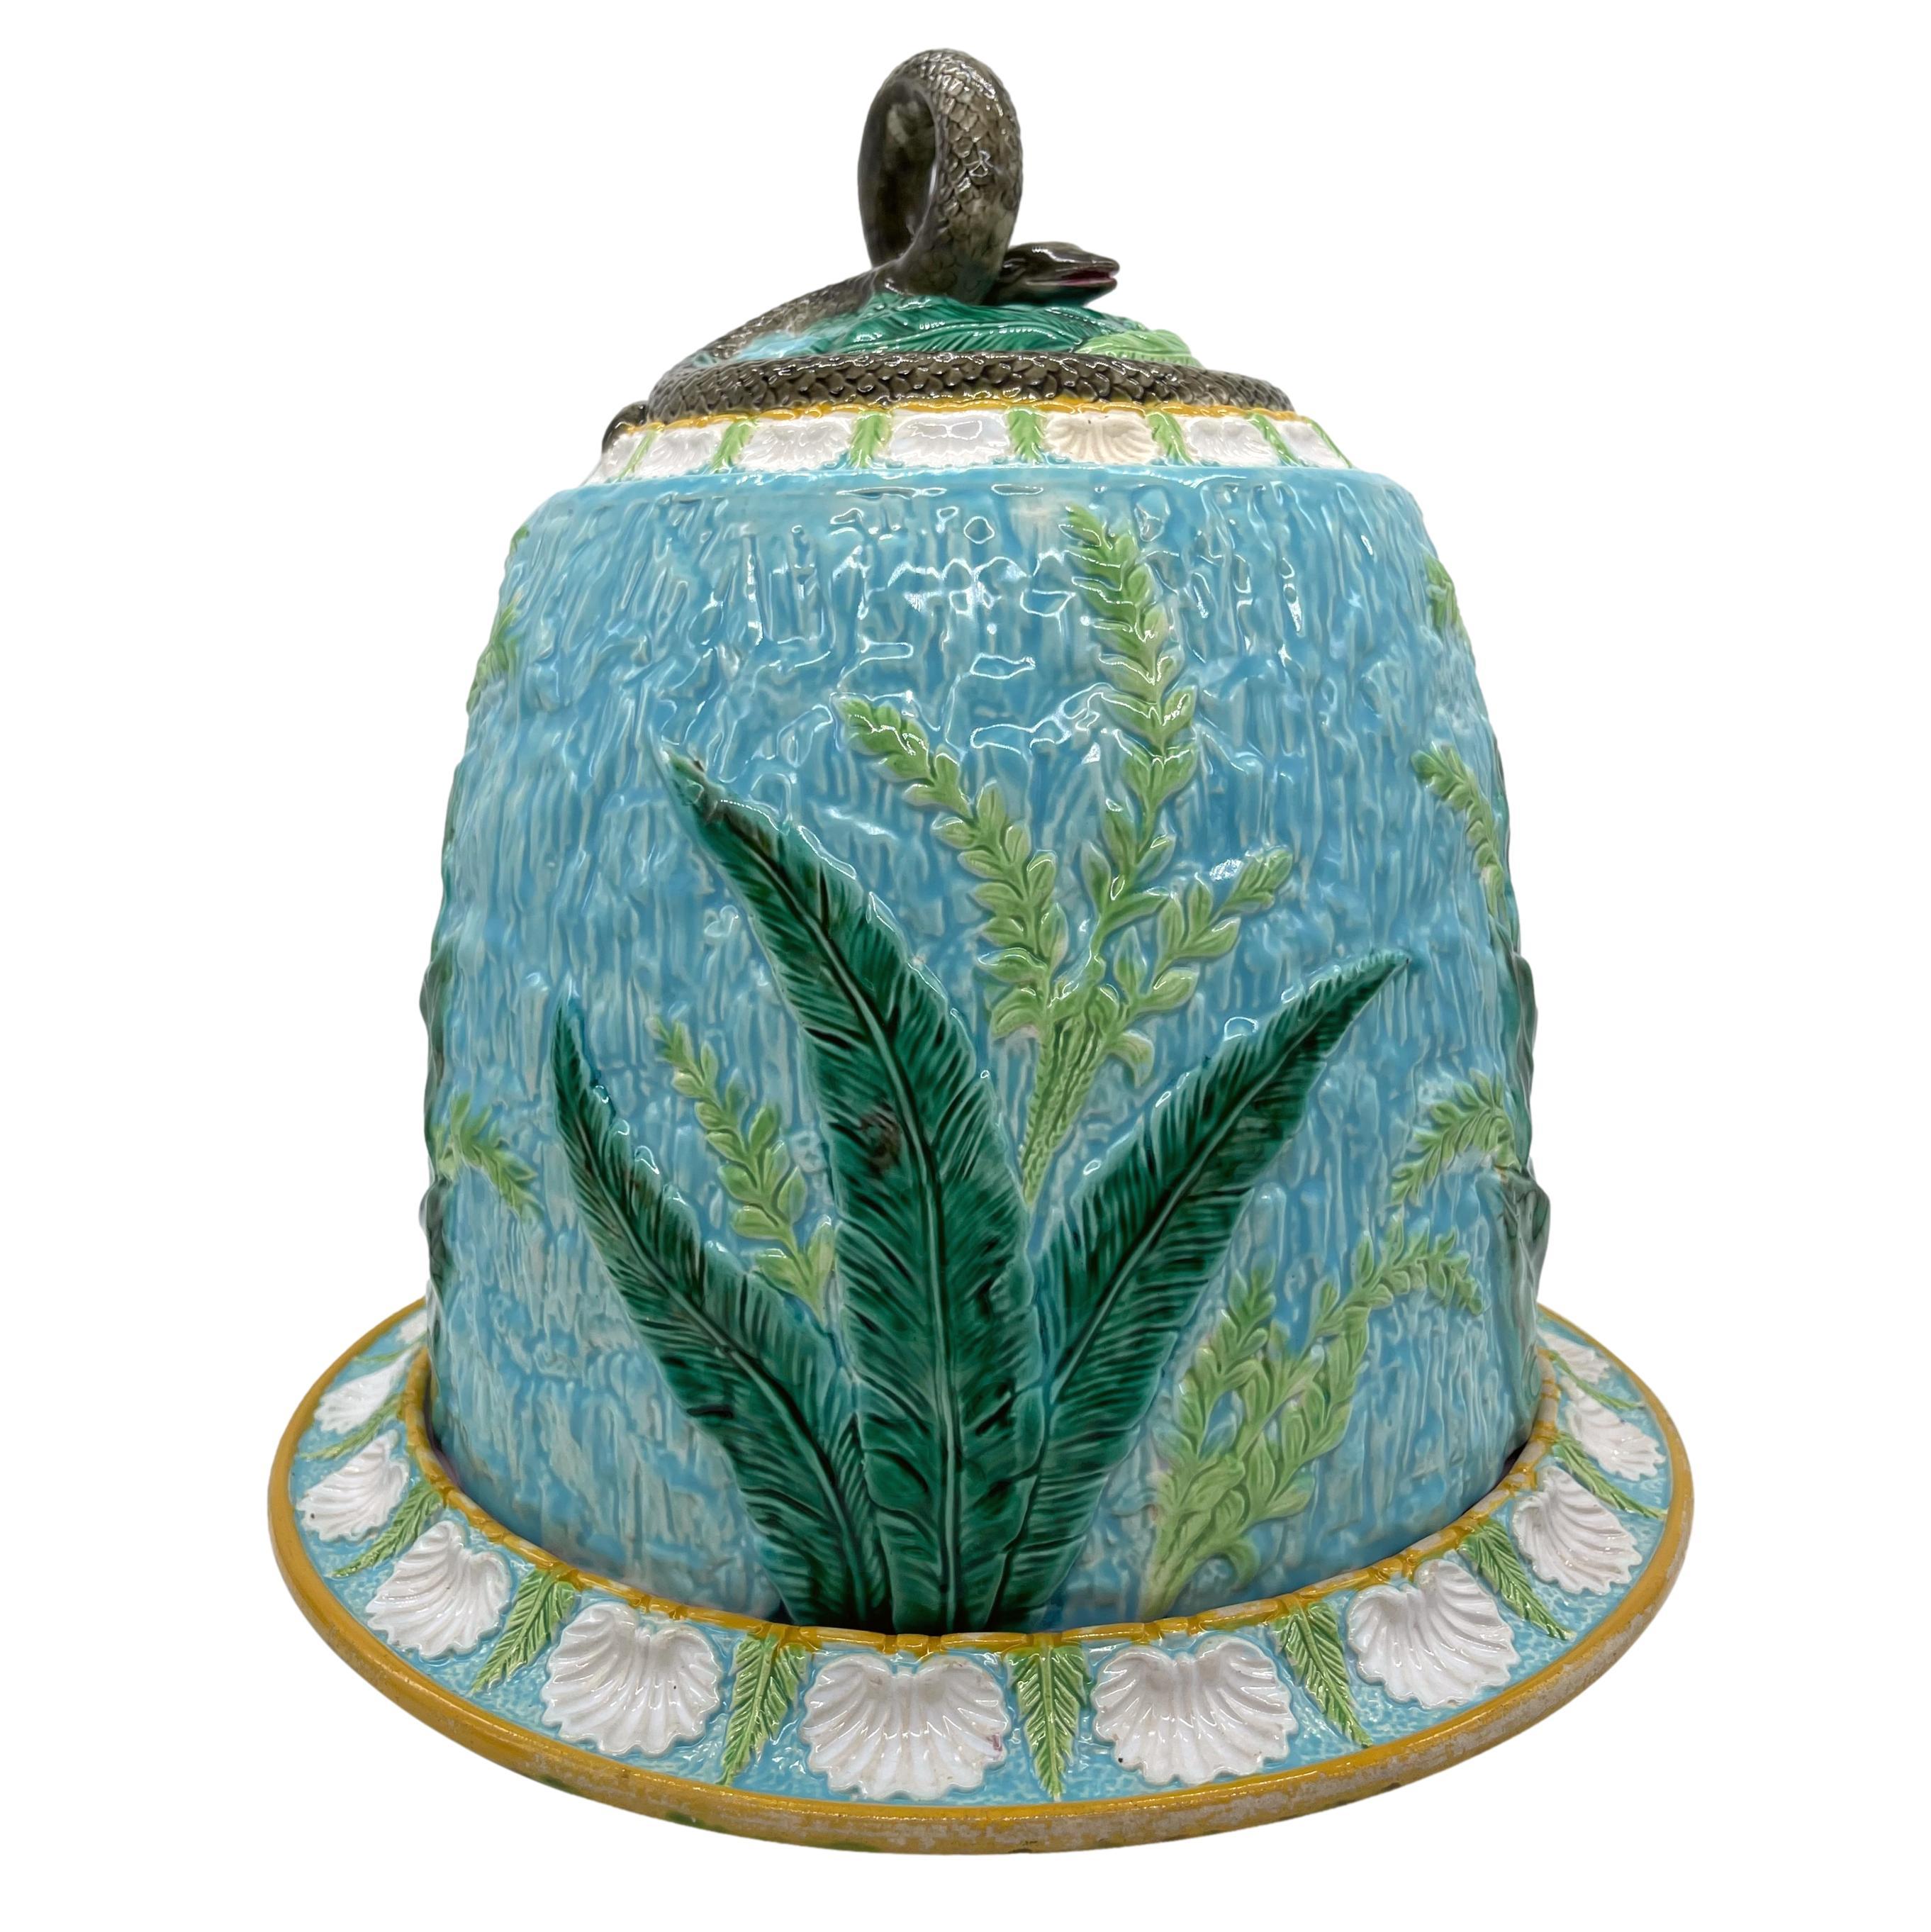 Molded George Jones Majolica Cheese-Keeper and Stand with Coiled Snake Finial, ca. 1870